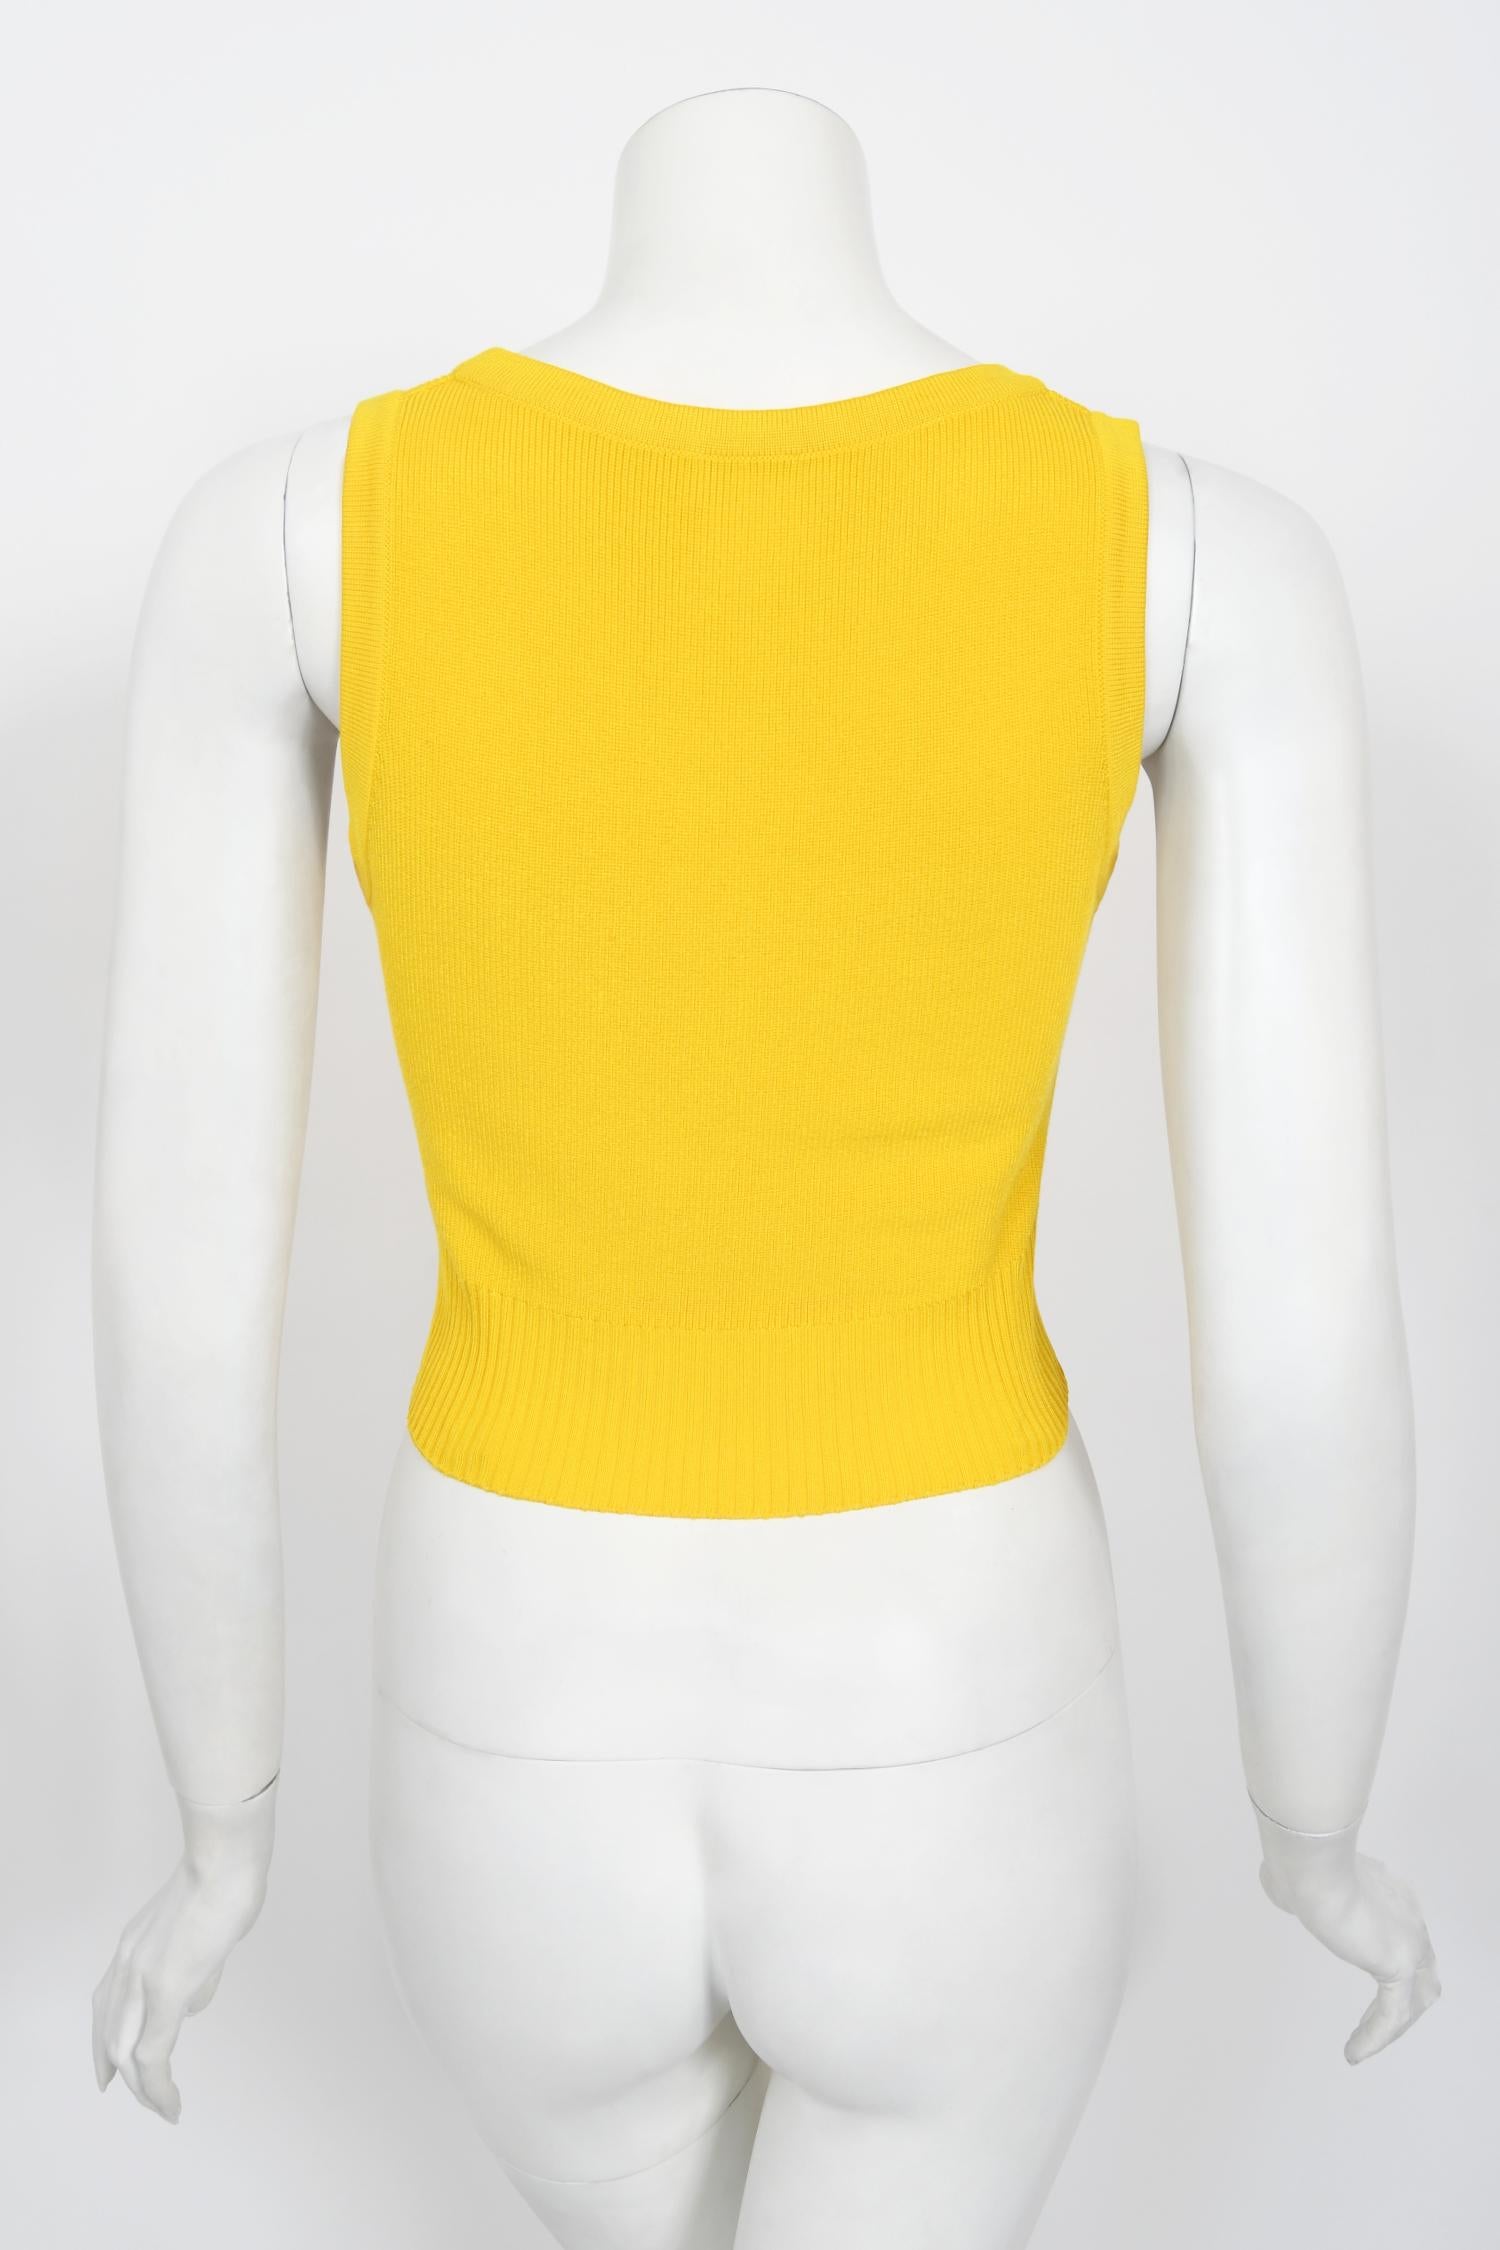 Vintage 1996 Chanel by Karl Lagerfeld Runway Yellow Knit Cropped Sweater Set  6